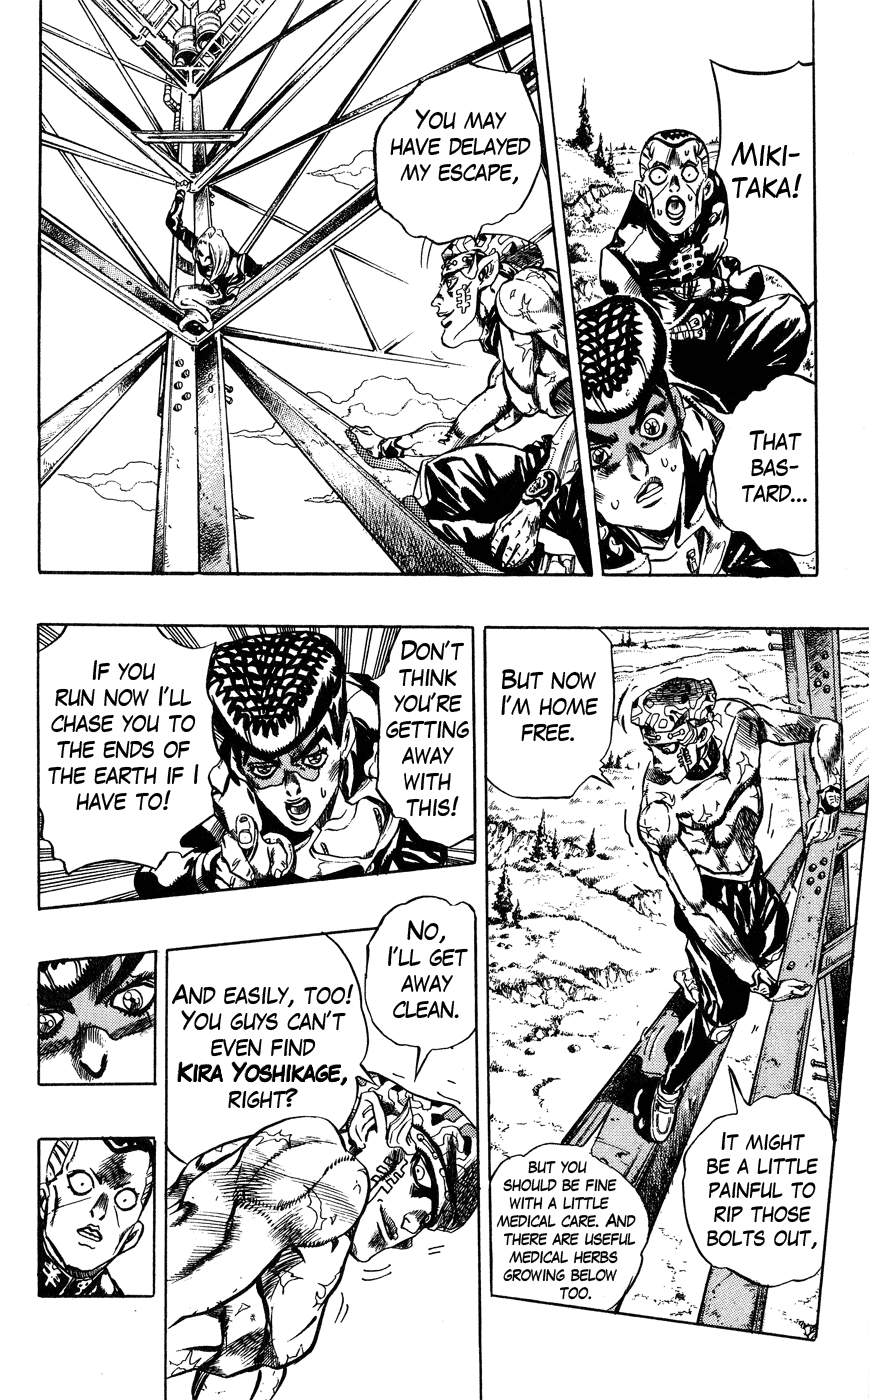 JoJo's Bizarre Adventure Part 4 Diamond is Unbreakable Vol. 15 Ch. 136 Who Wants to Live on a Transmission Tower? Part 4